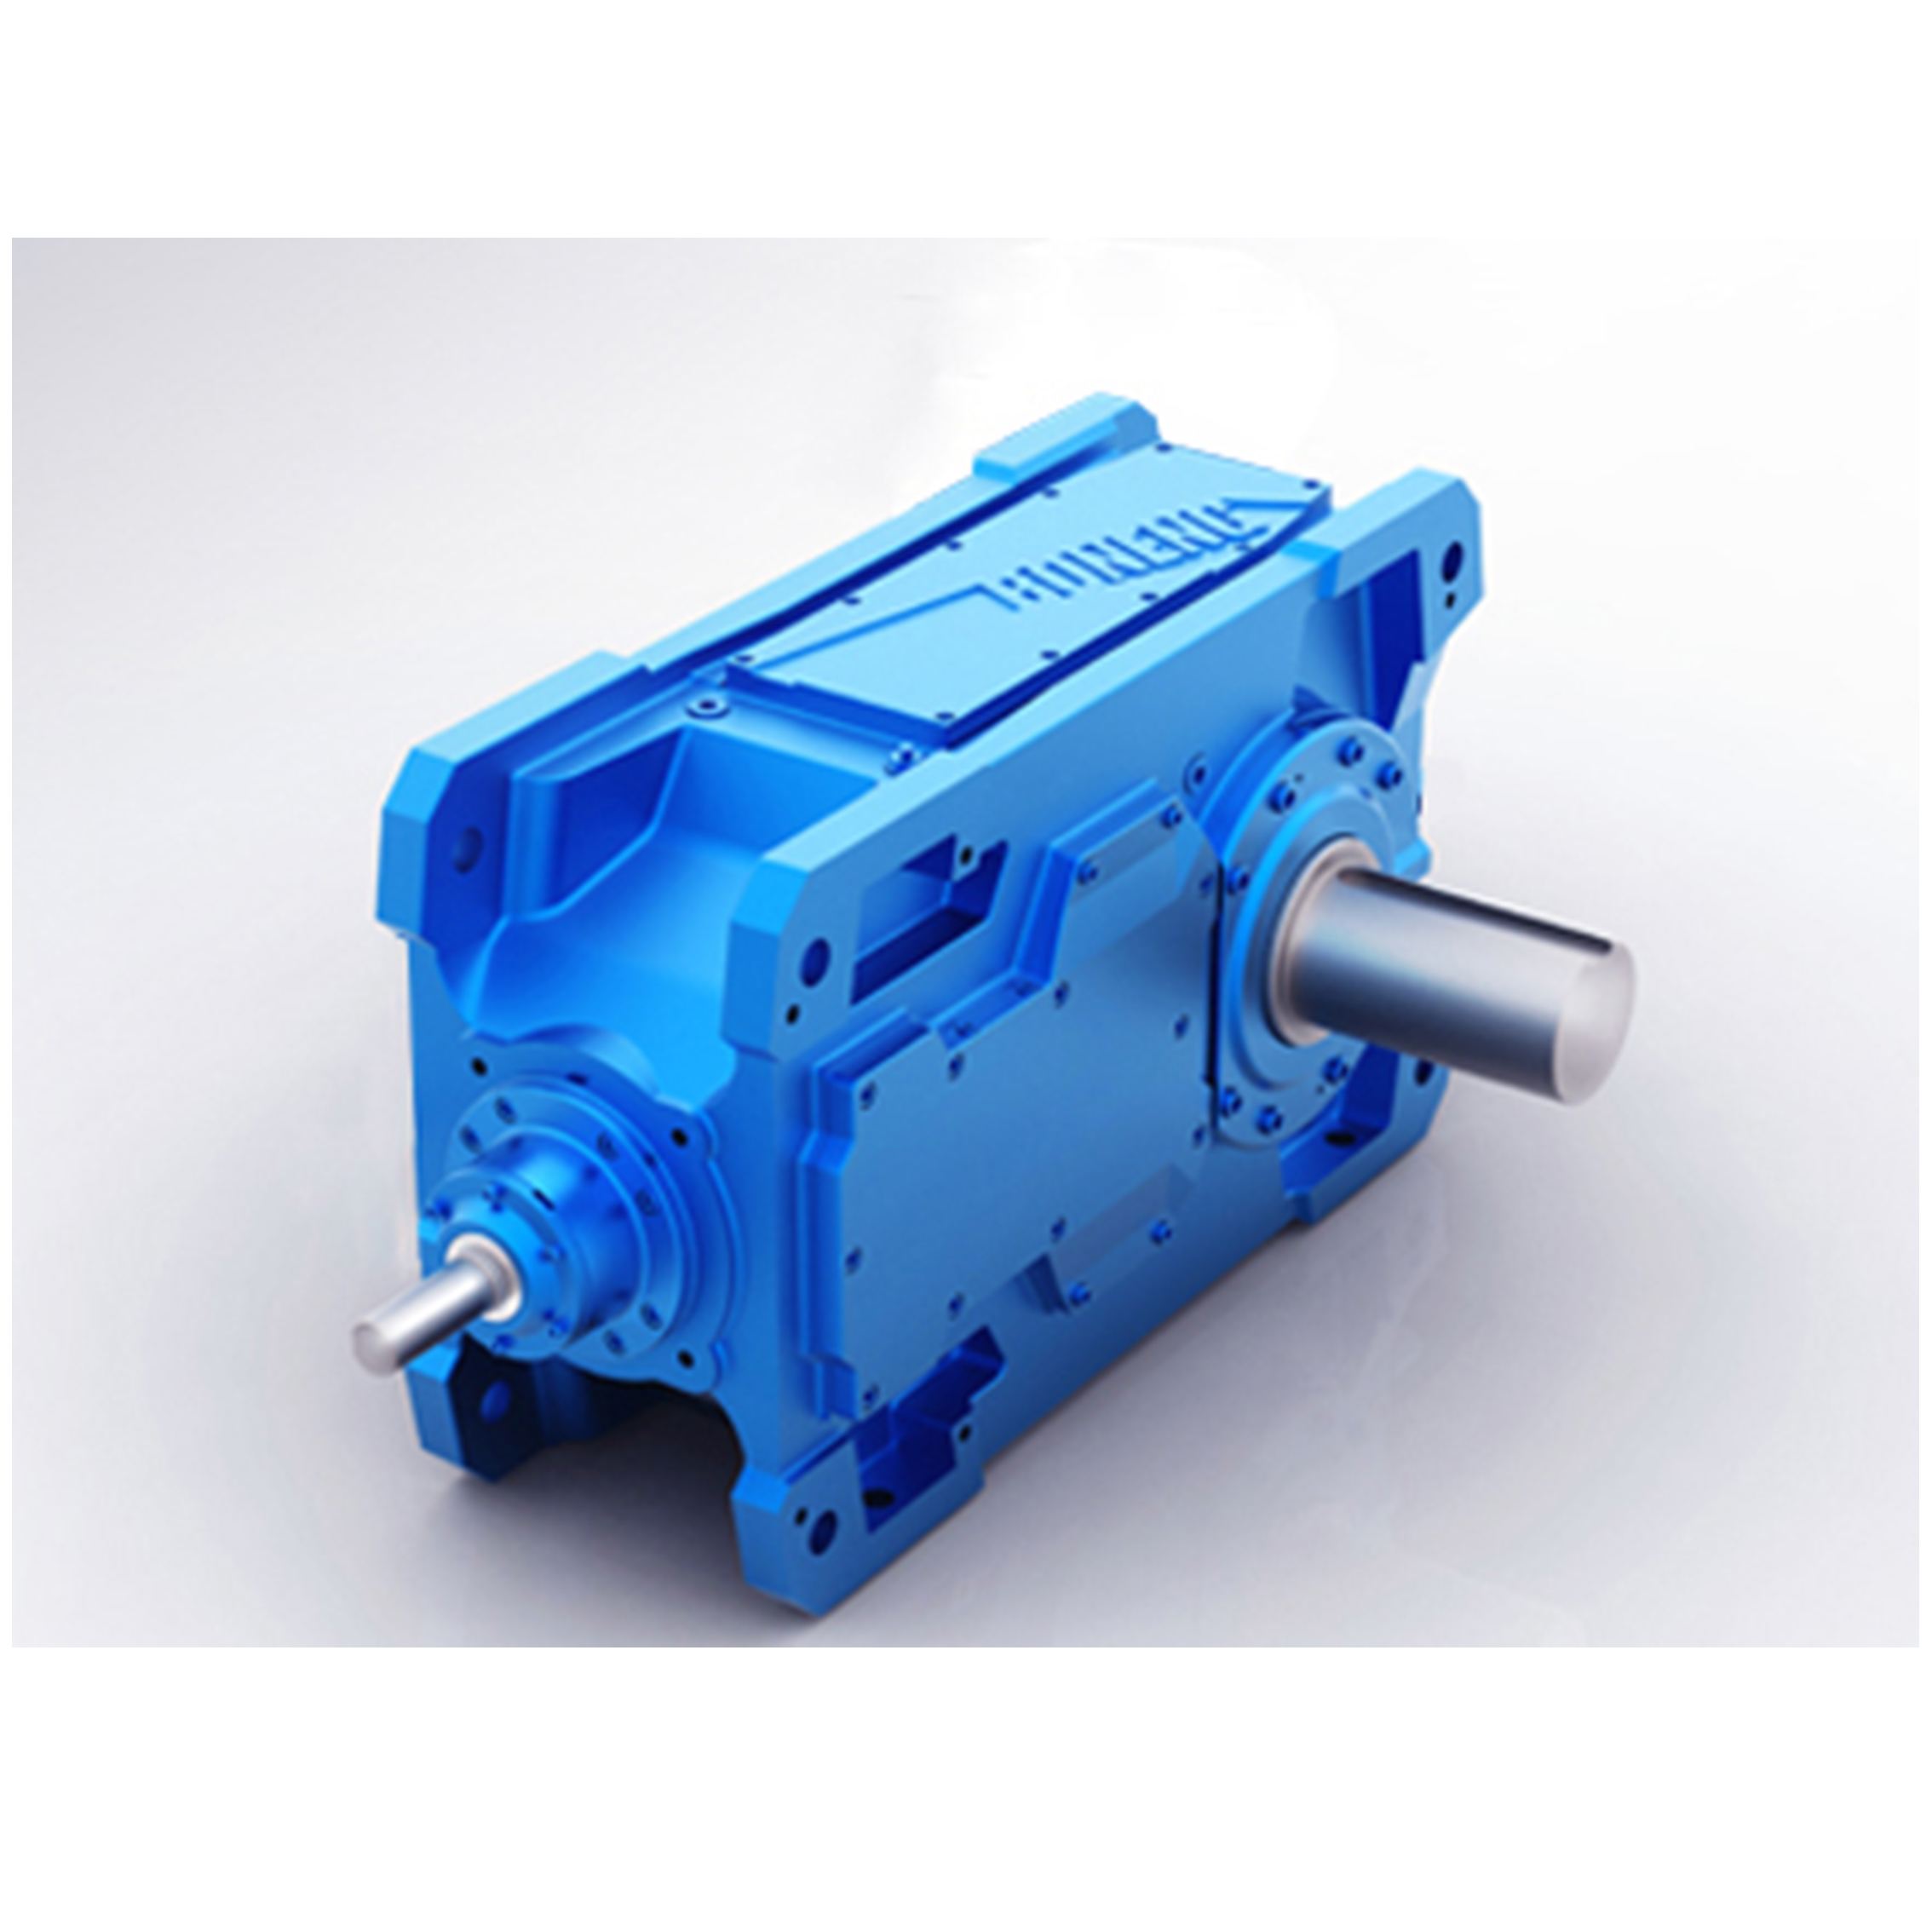 Flender brand H3SH14 gearboxes